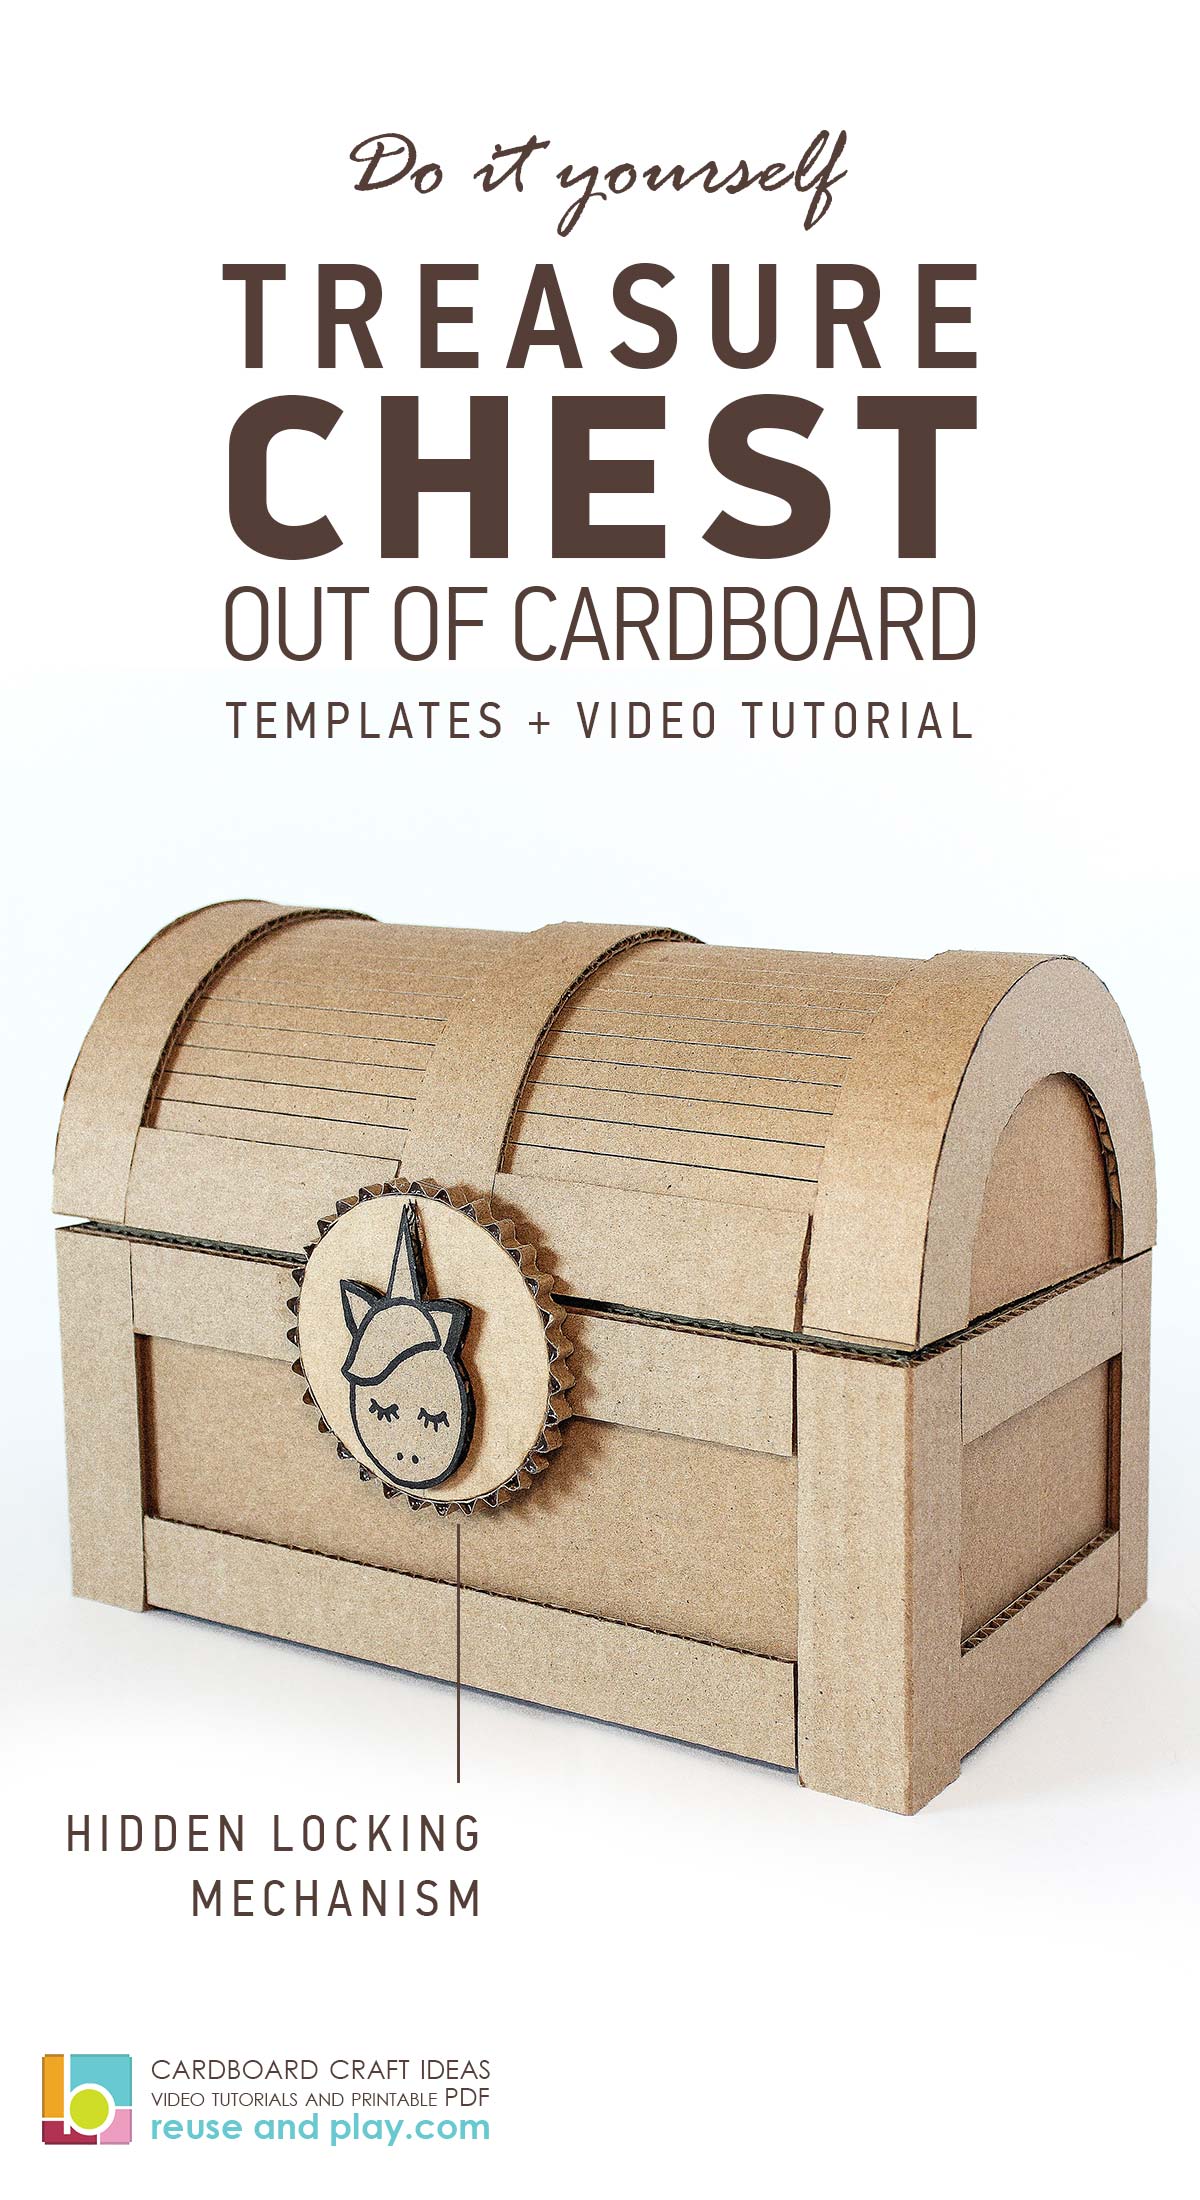 Treasure Chest out of cardboard Templates and Tutorial